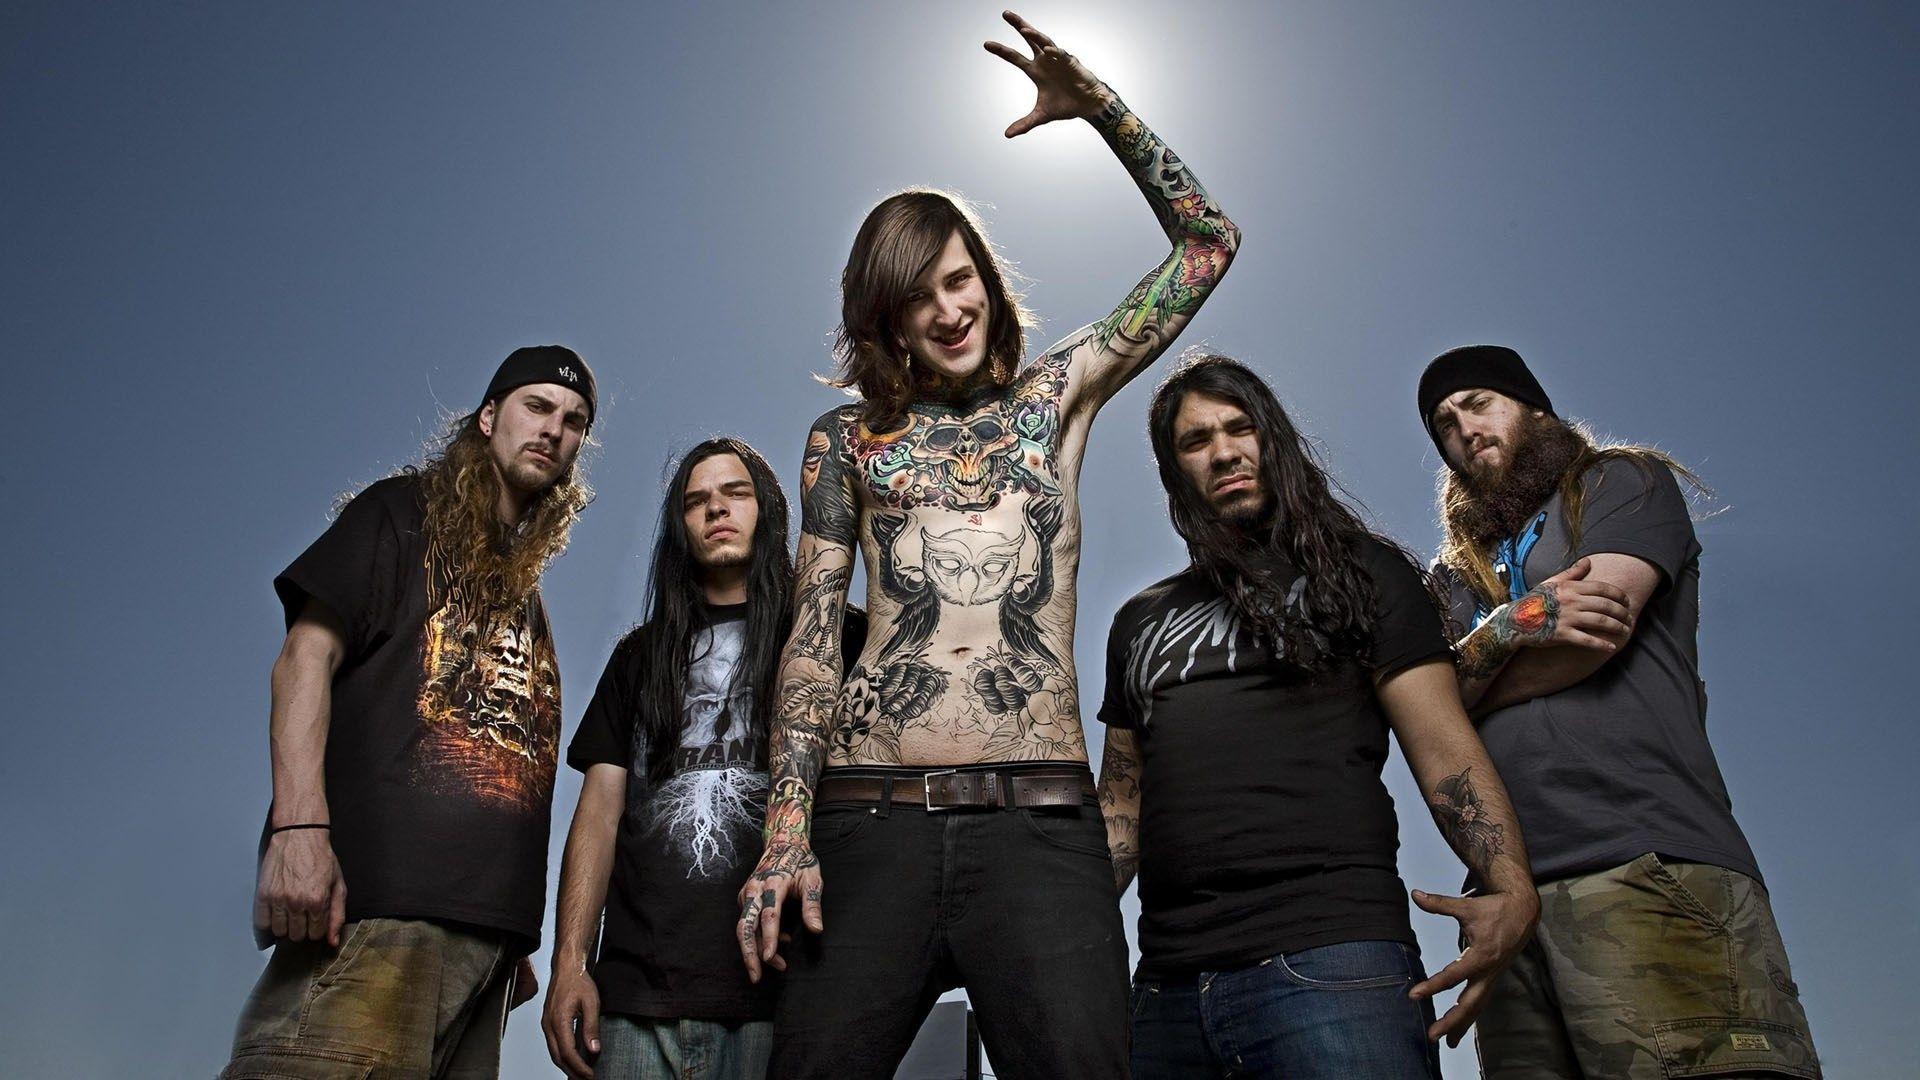 Download Wallpaper 1920x1080 suicide silence, tattoo, rockers, sky